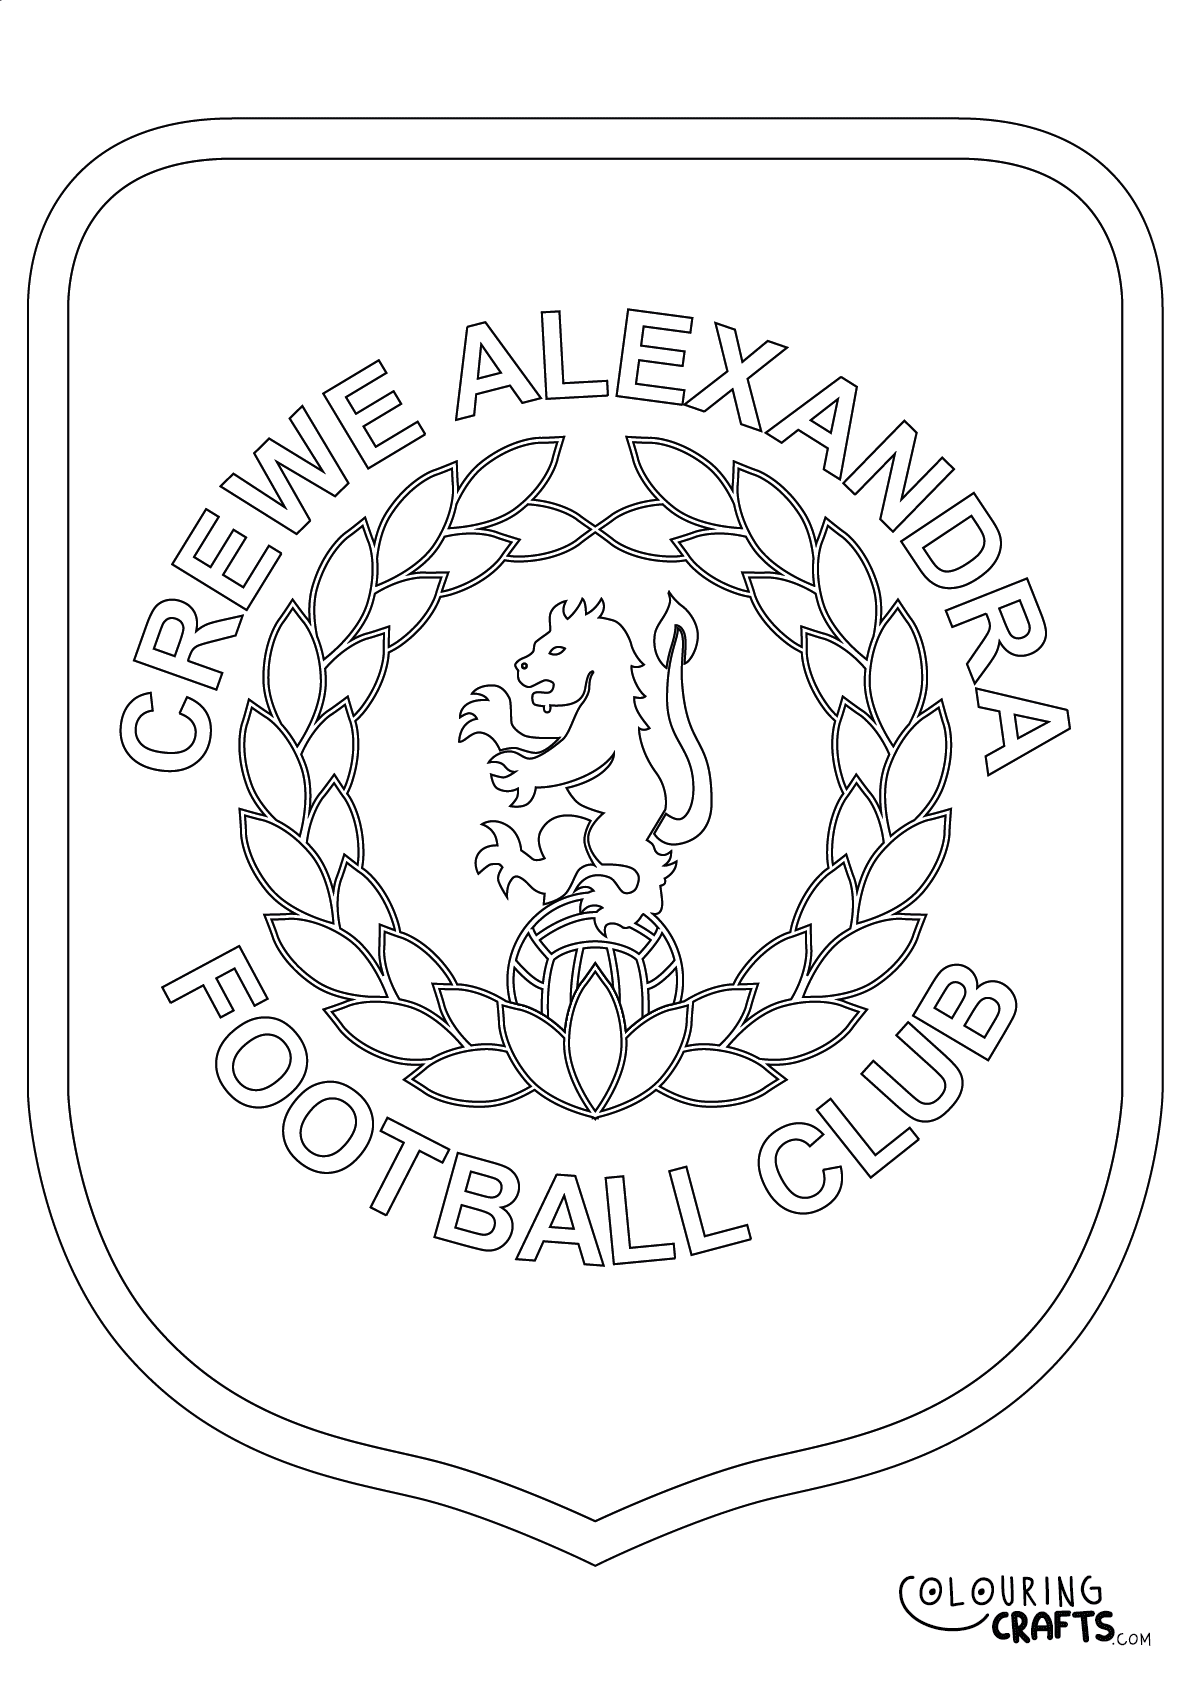 Crewe Alexandra Badge Printable Colouring Page - Colouring Crafts